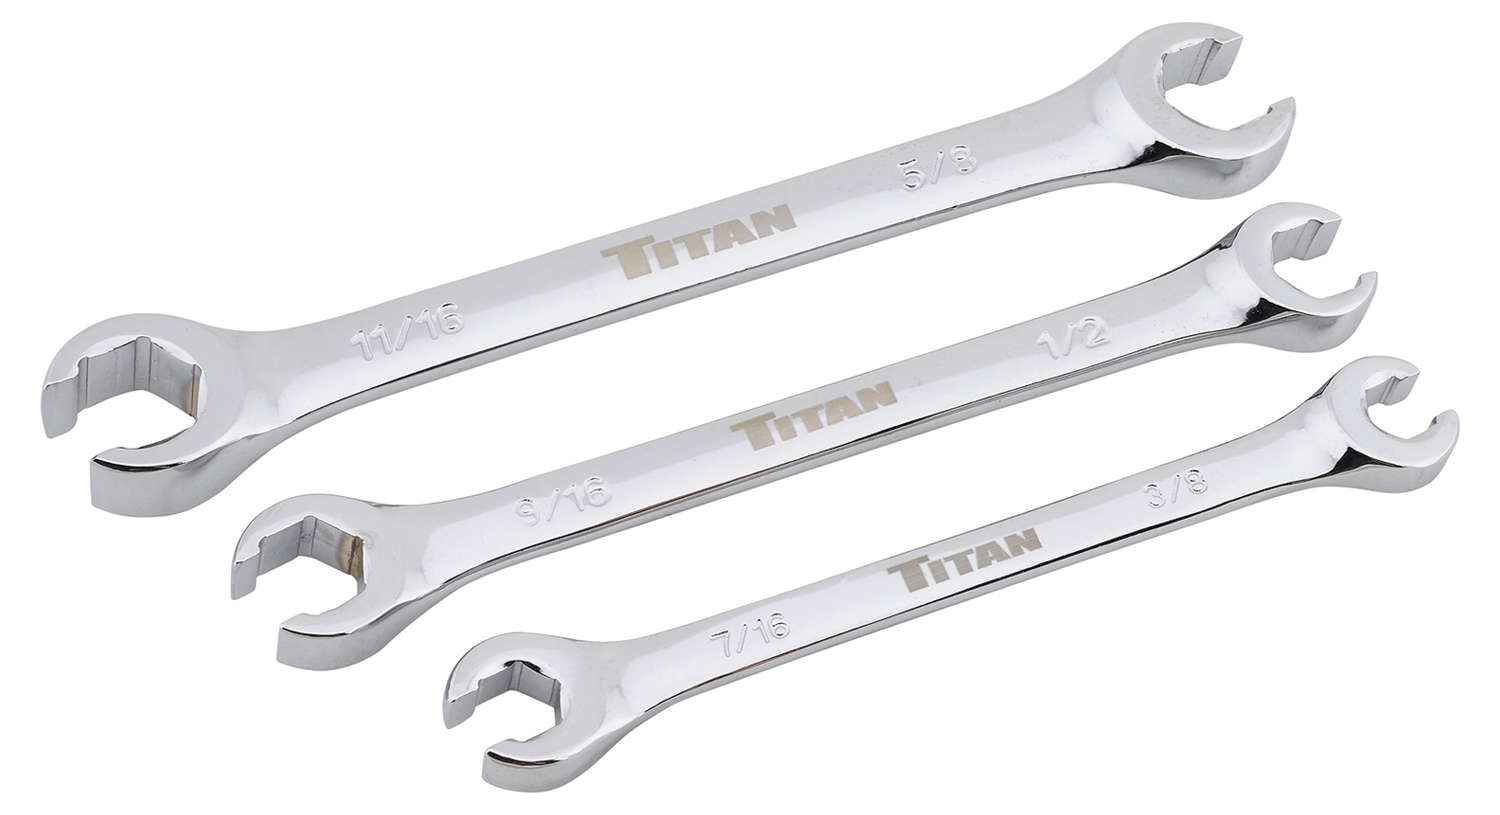 three flare nut wrenches